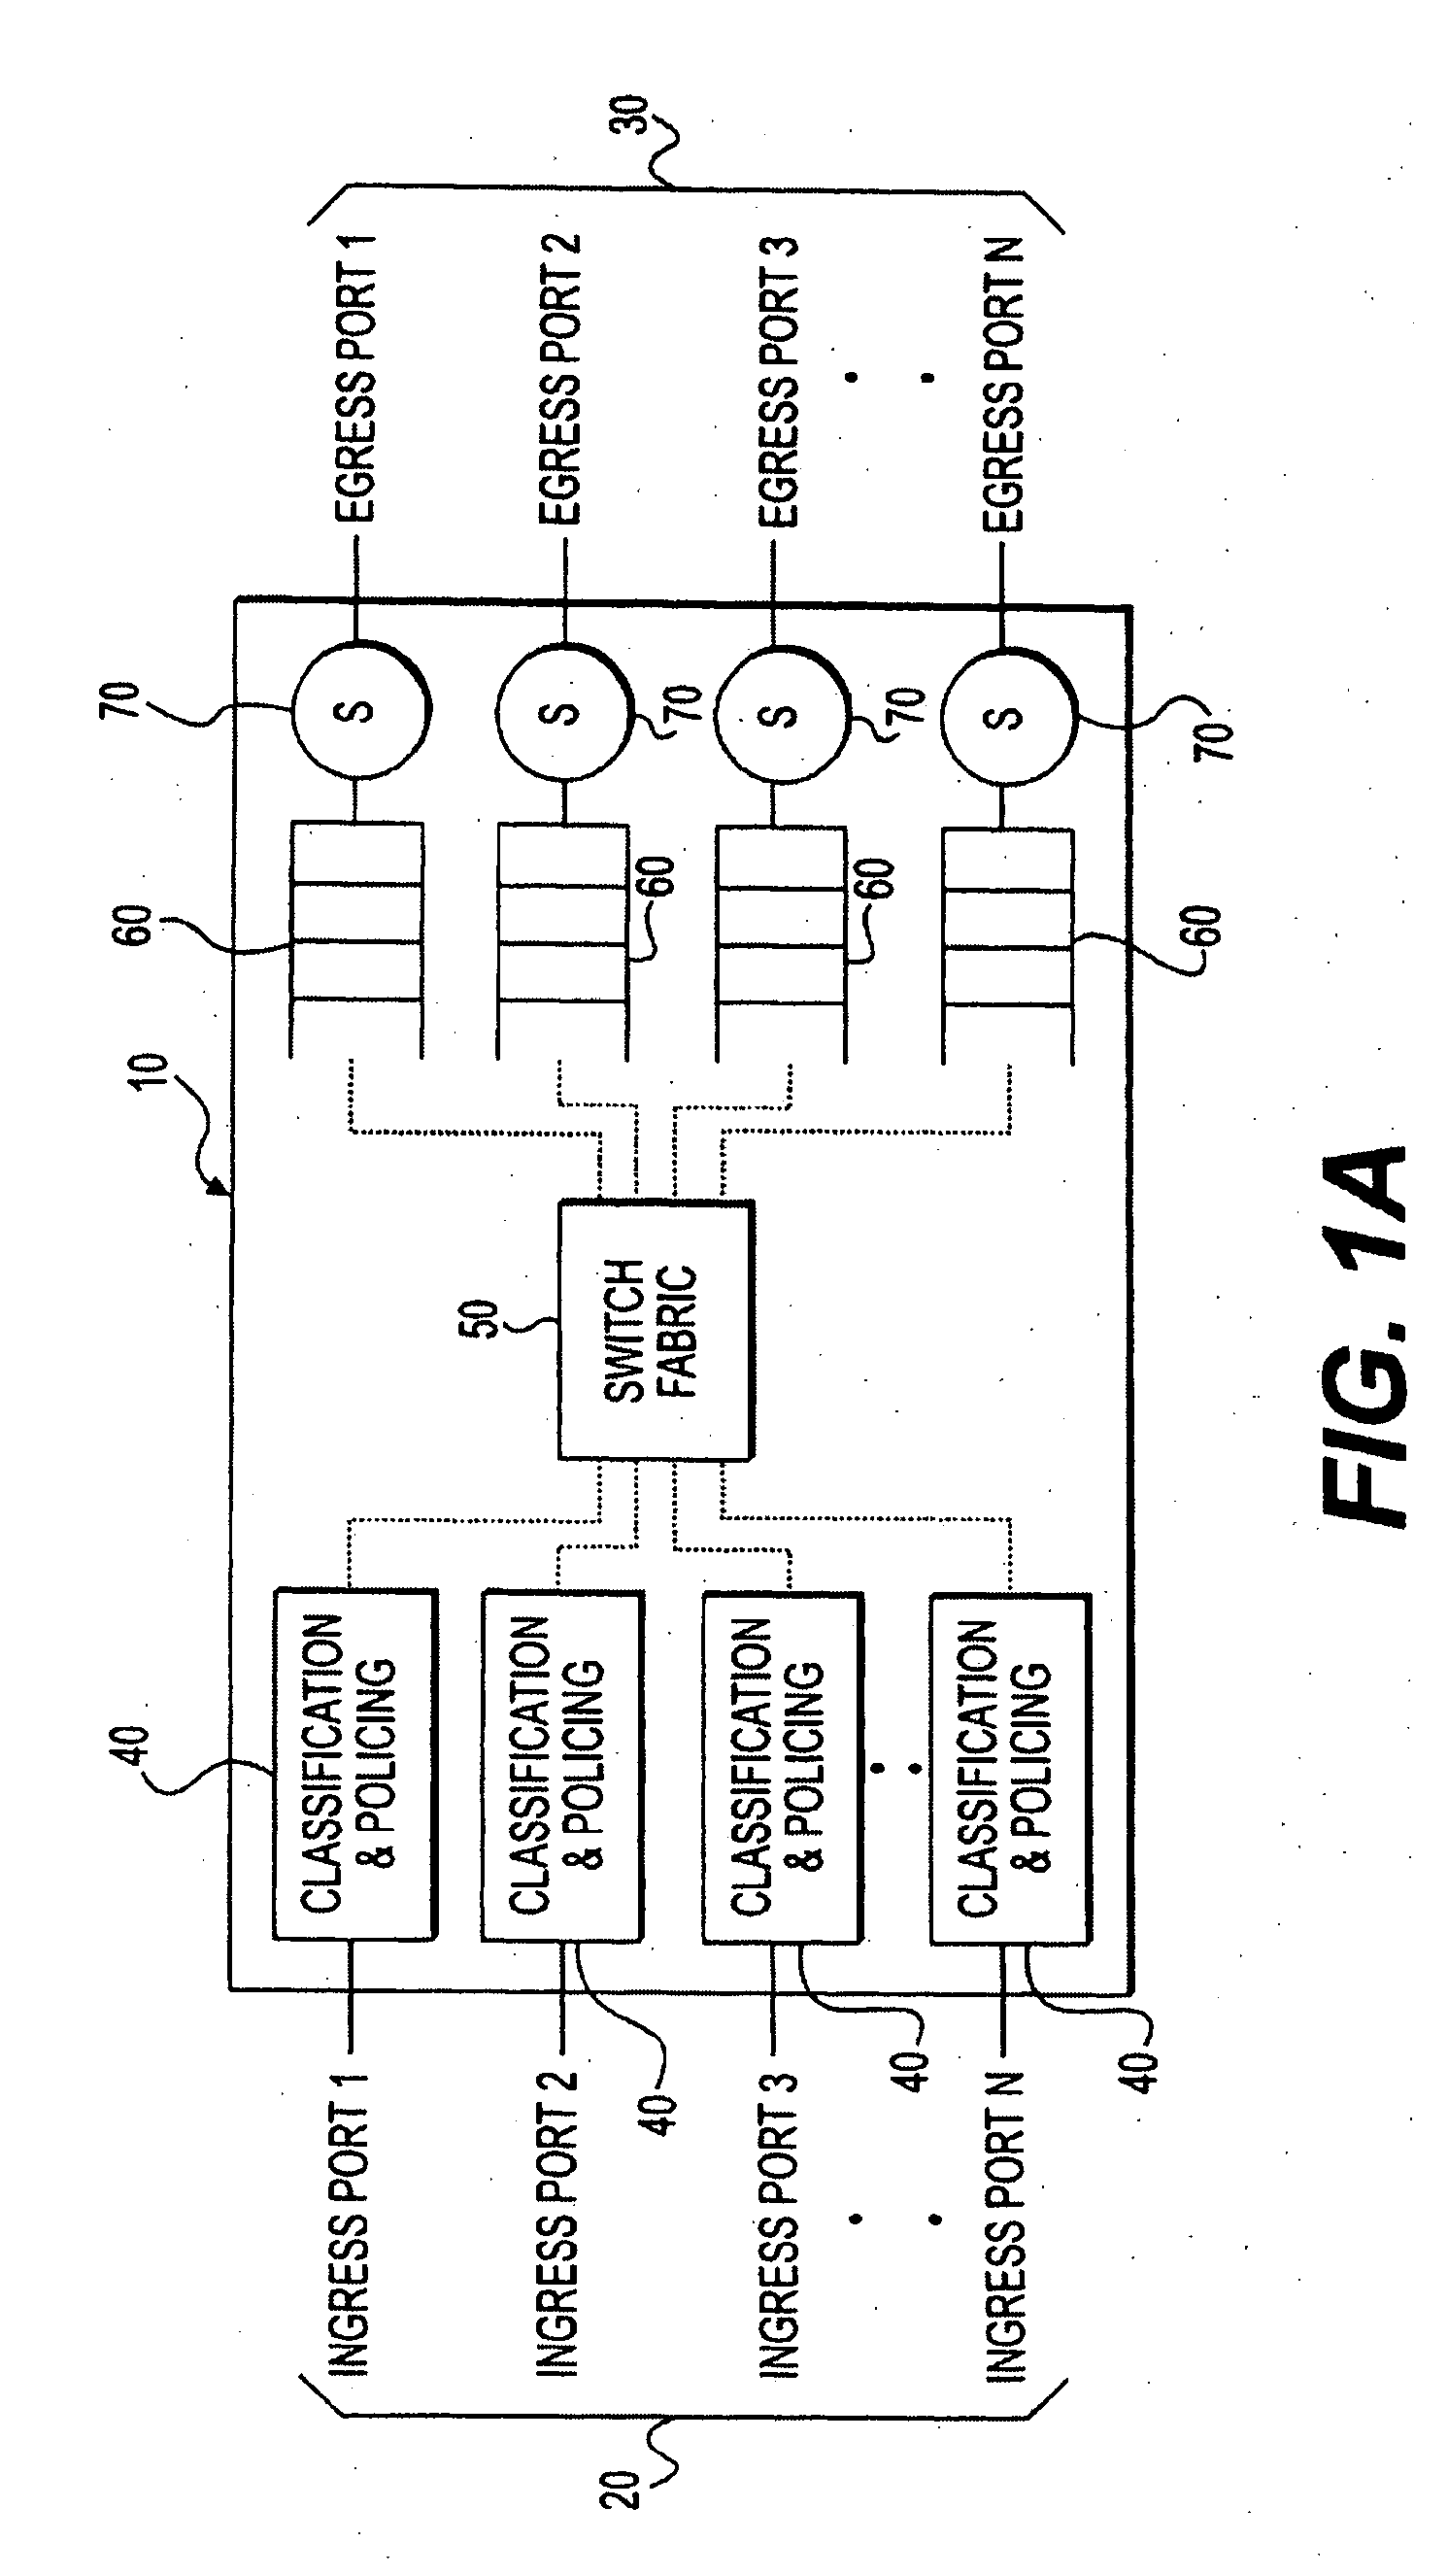 Method and apparatus for improving performance in a network using a virtual queue and a switched poisson process traffic model